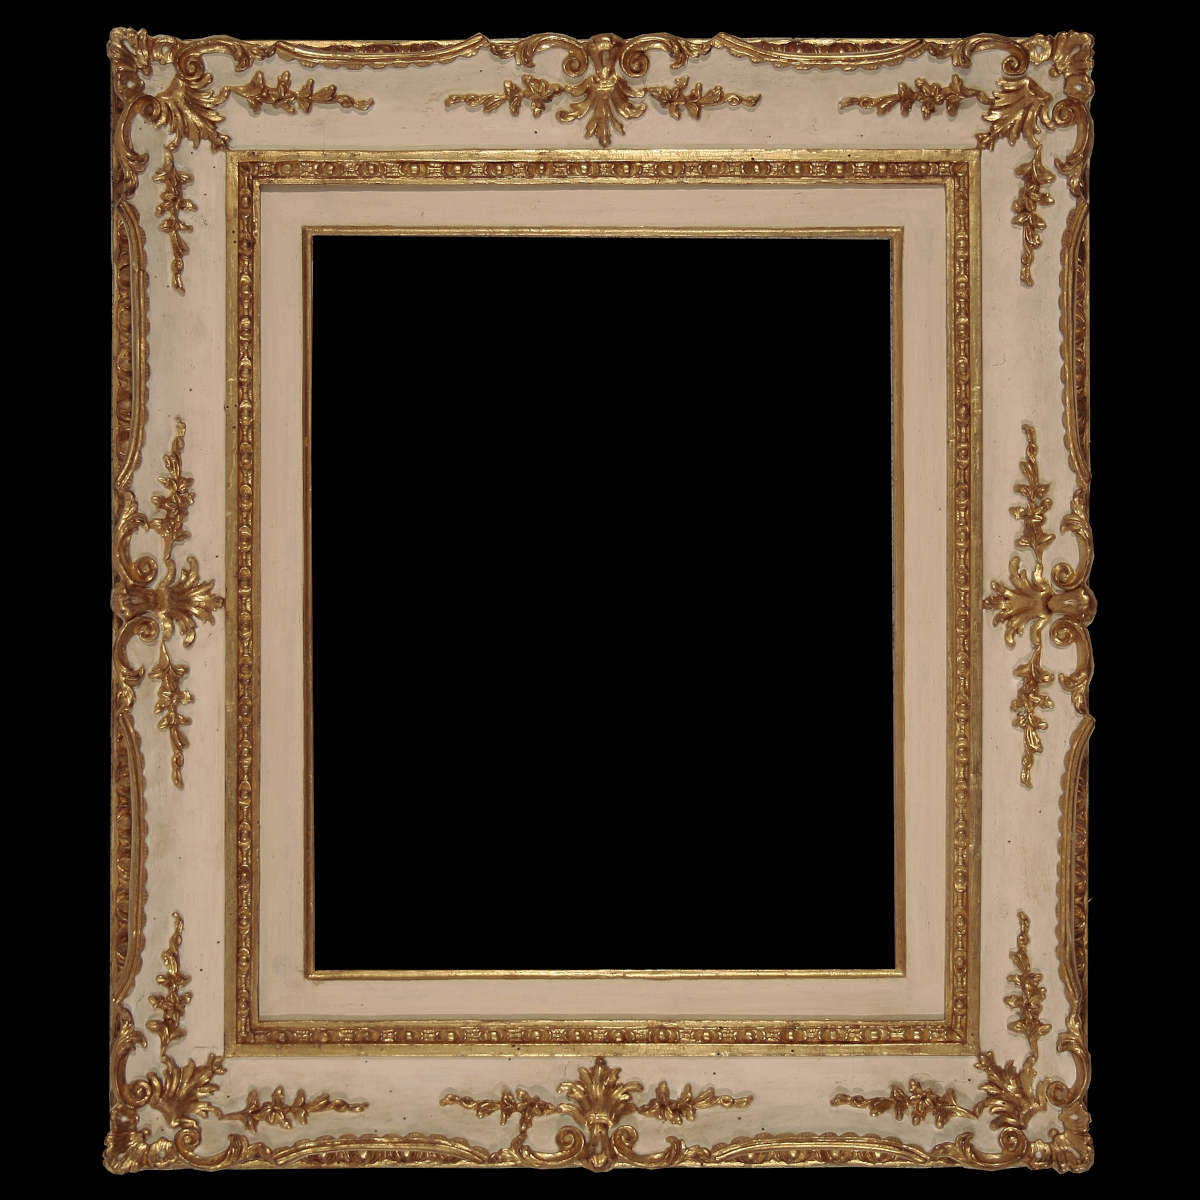 Antique French Picture Frames | Exclusive Reproductions | NowFrames